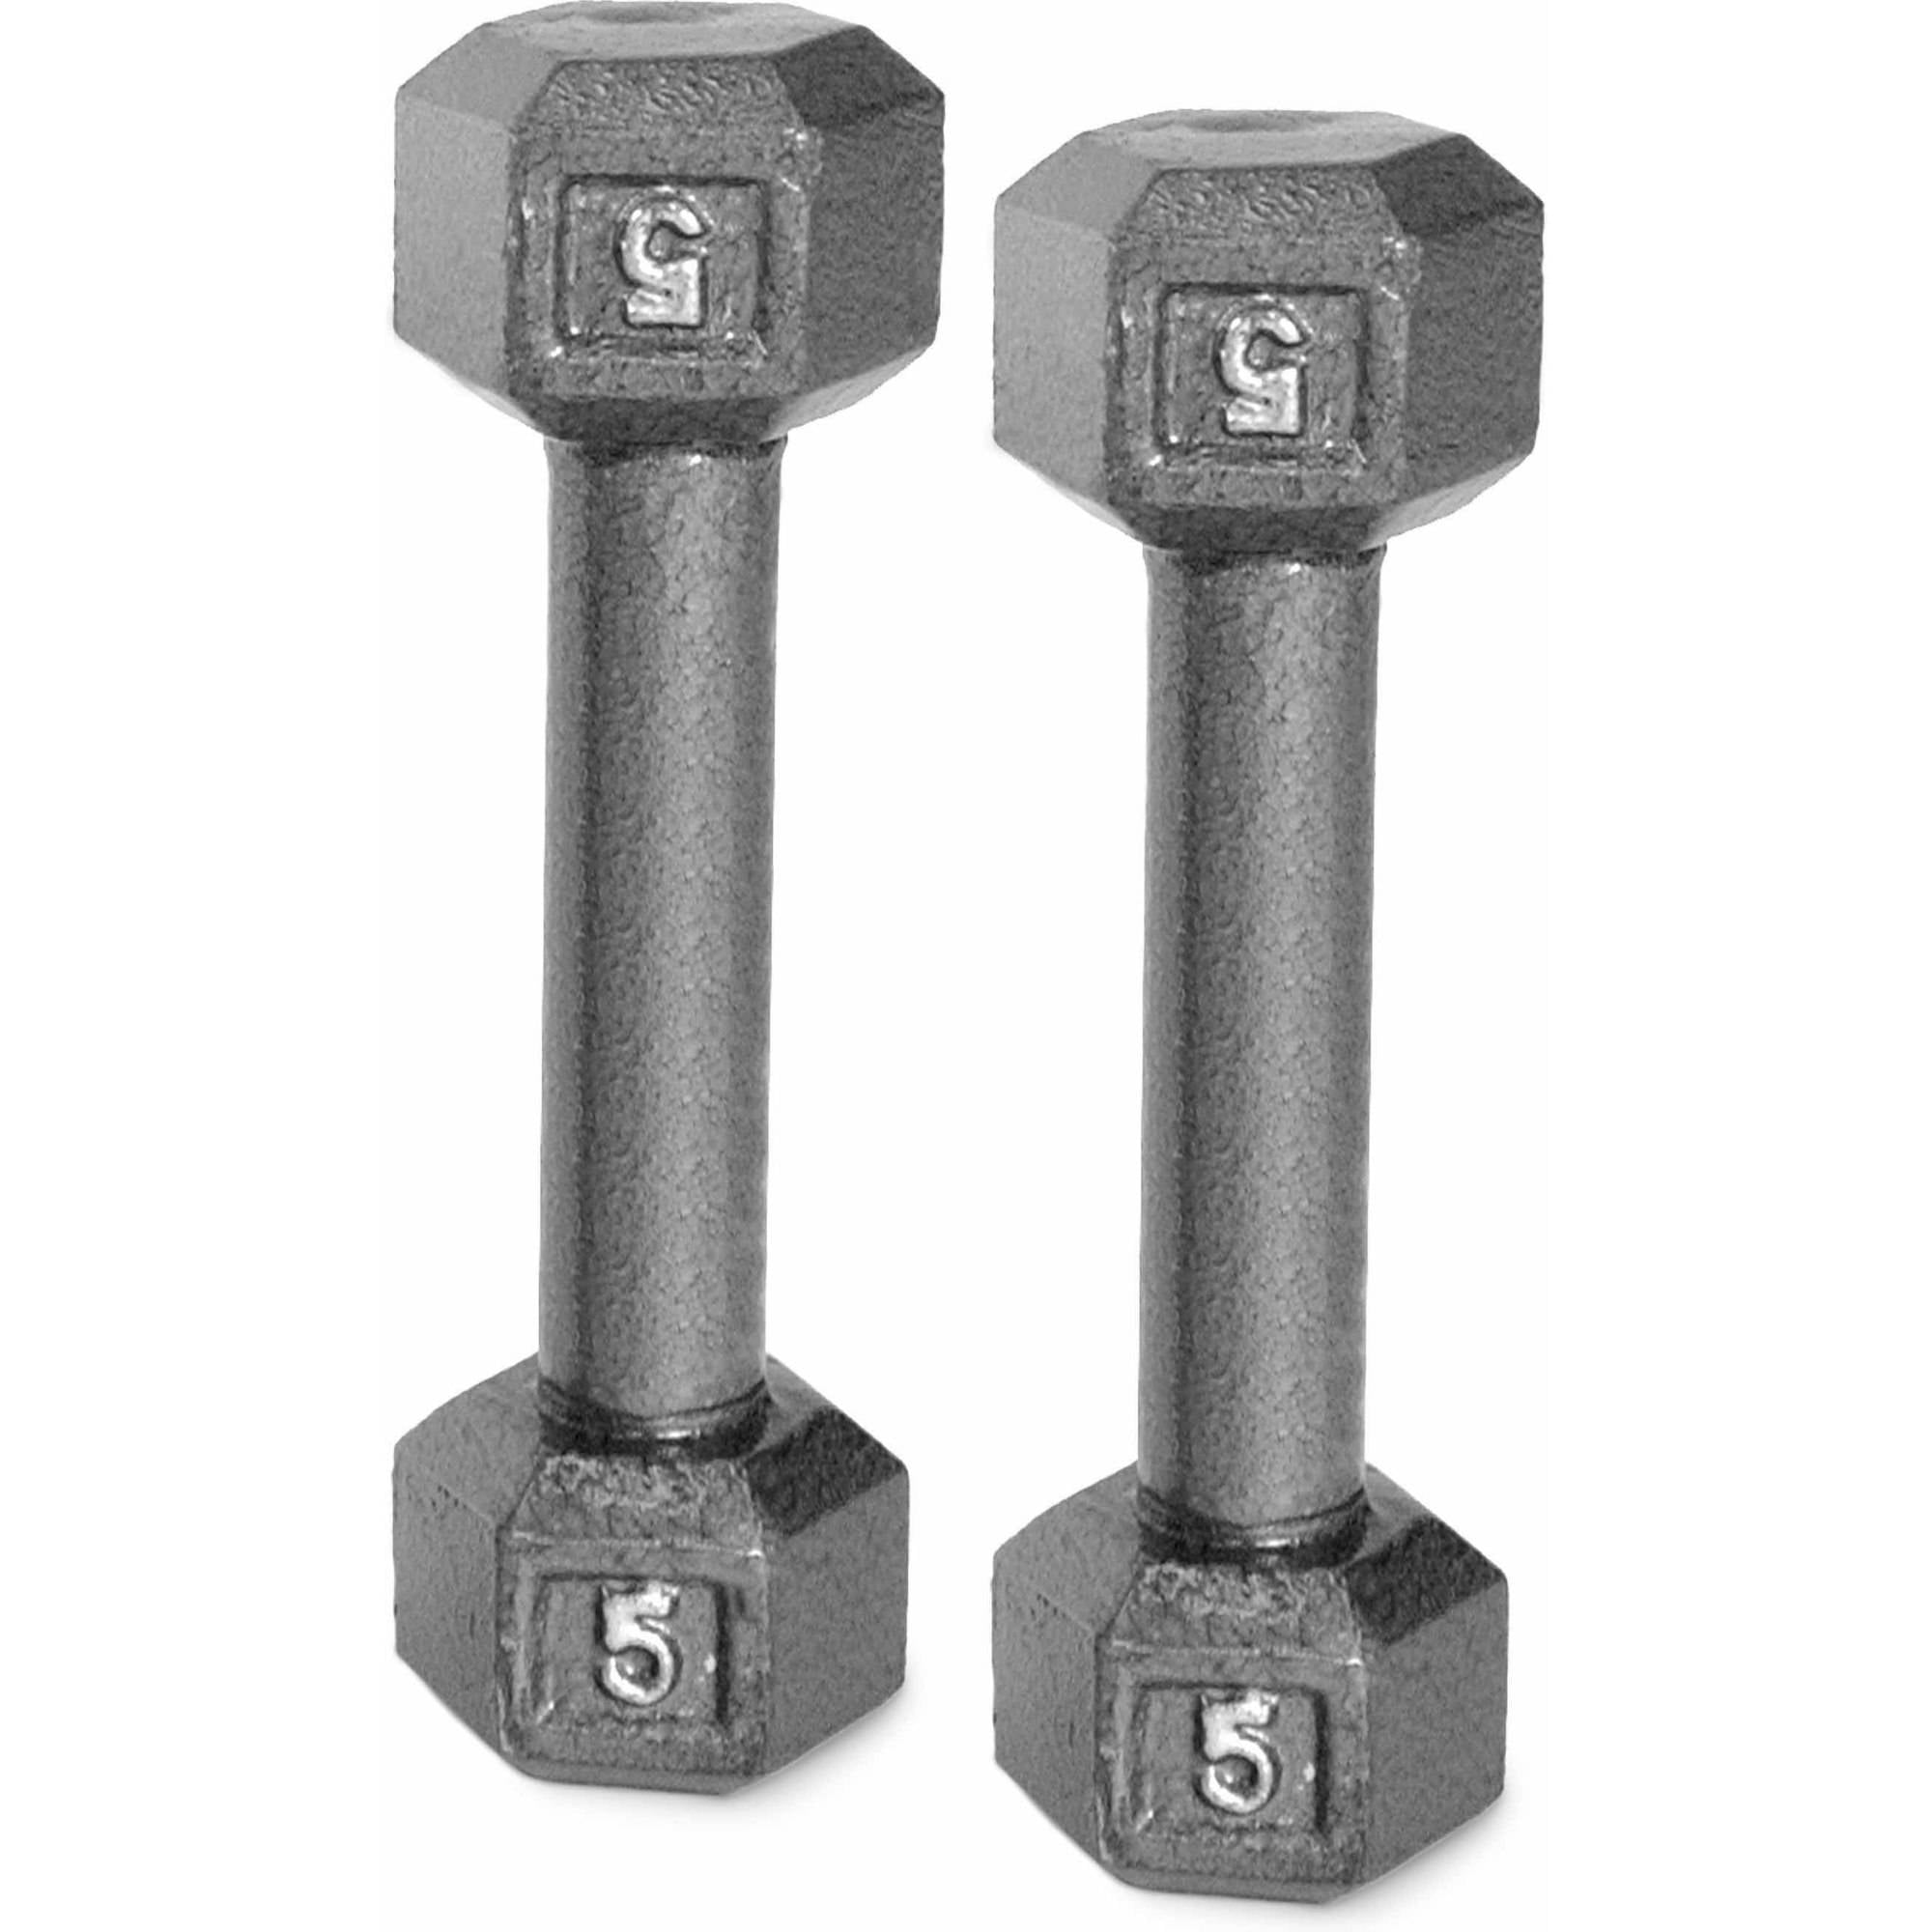 Cast Iron Hex Dumbbell Weight 5lb Dumbbells  10lbs Total New Grey Set Pair 